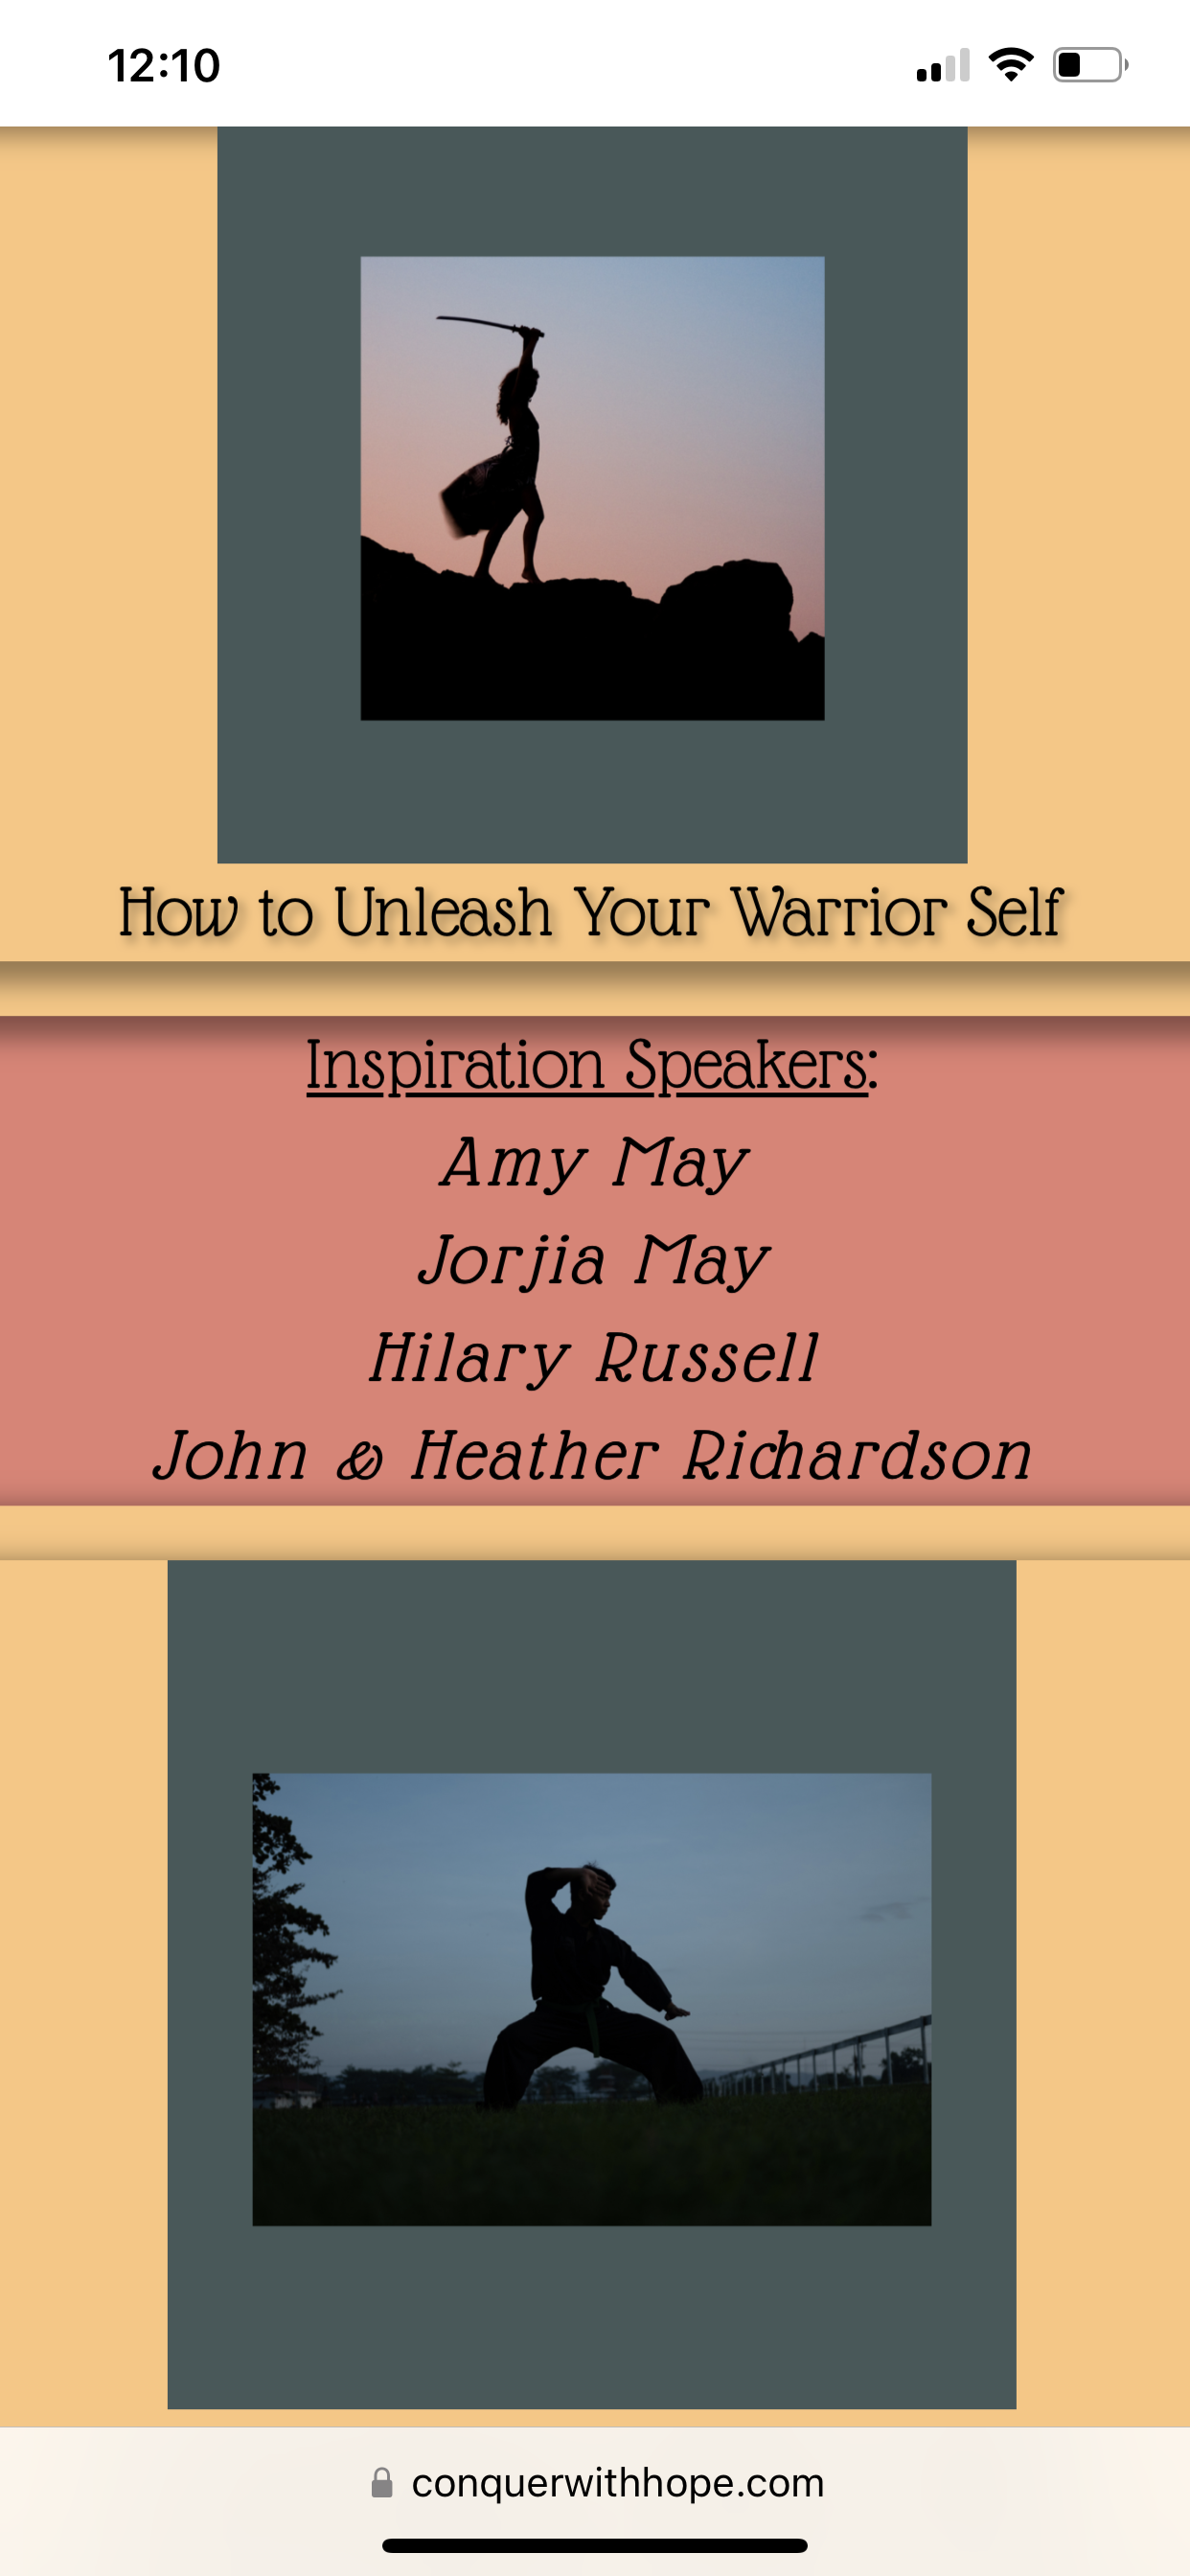 A screen shot of the website with a photo of a warrior on top and then a warrior on bottom - with speaker names listed between 